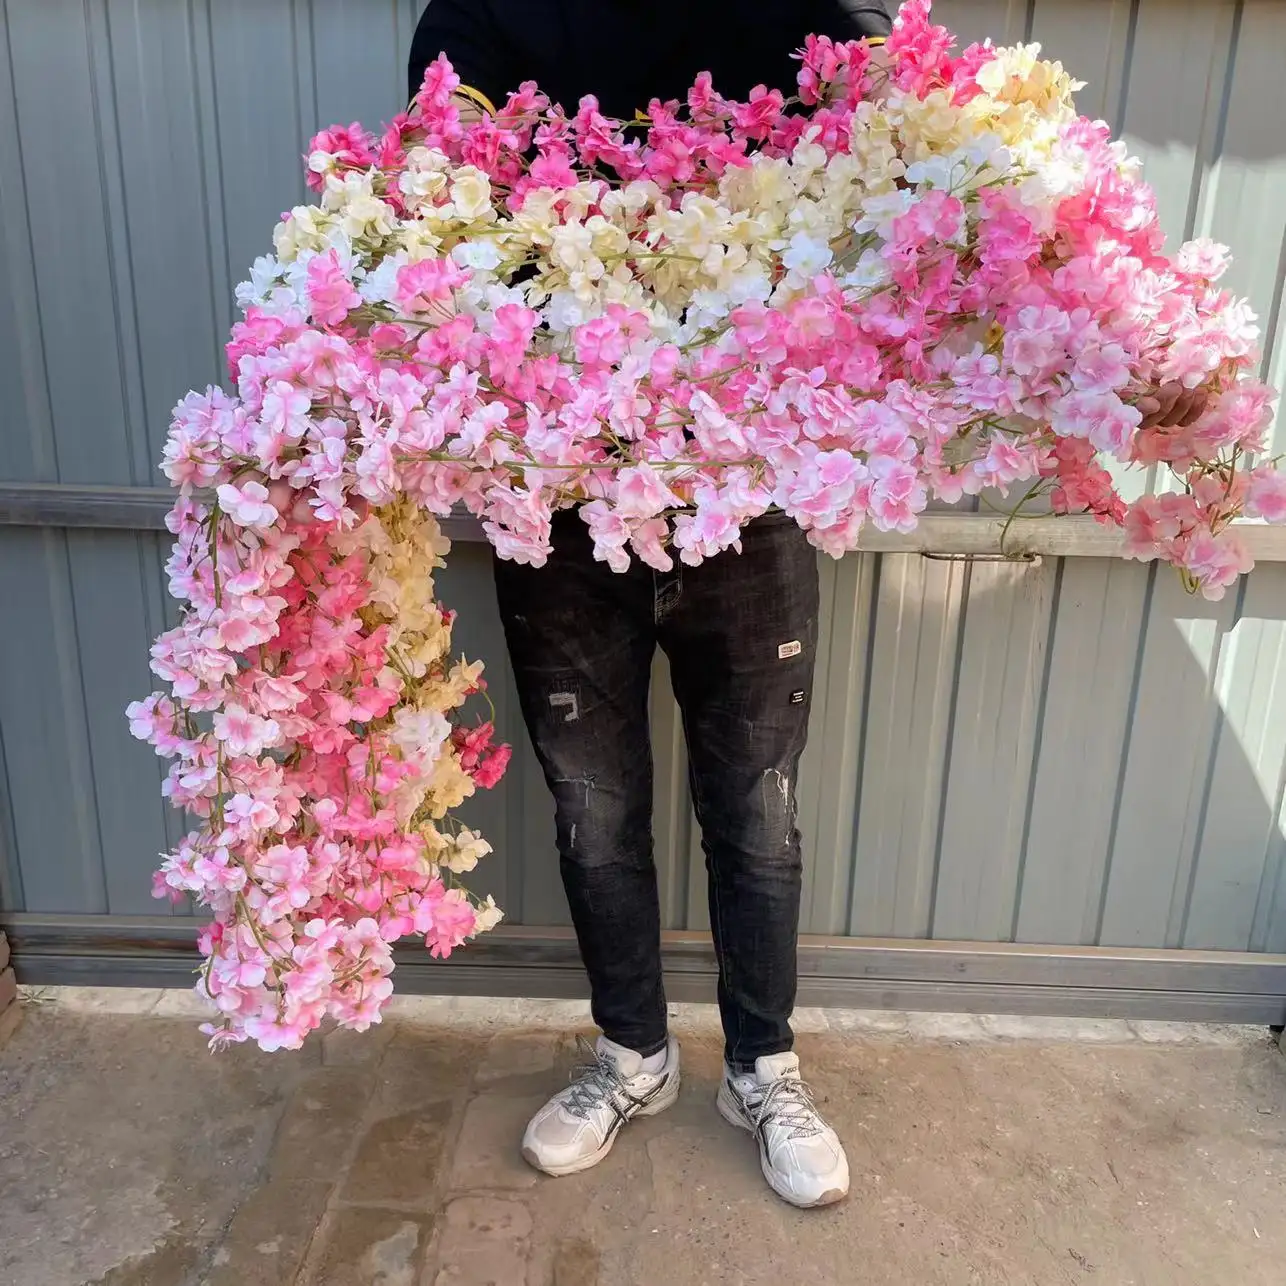 Hot sale quality 1.8 meters pink cherry blossom vines wedding decoration artificial flower garland